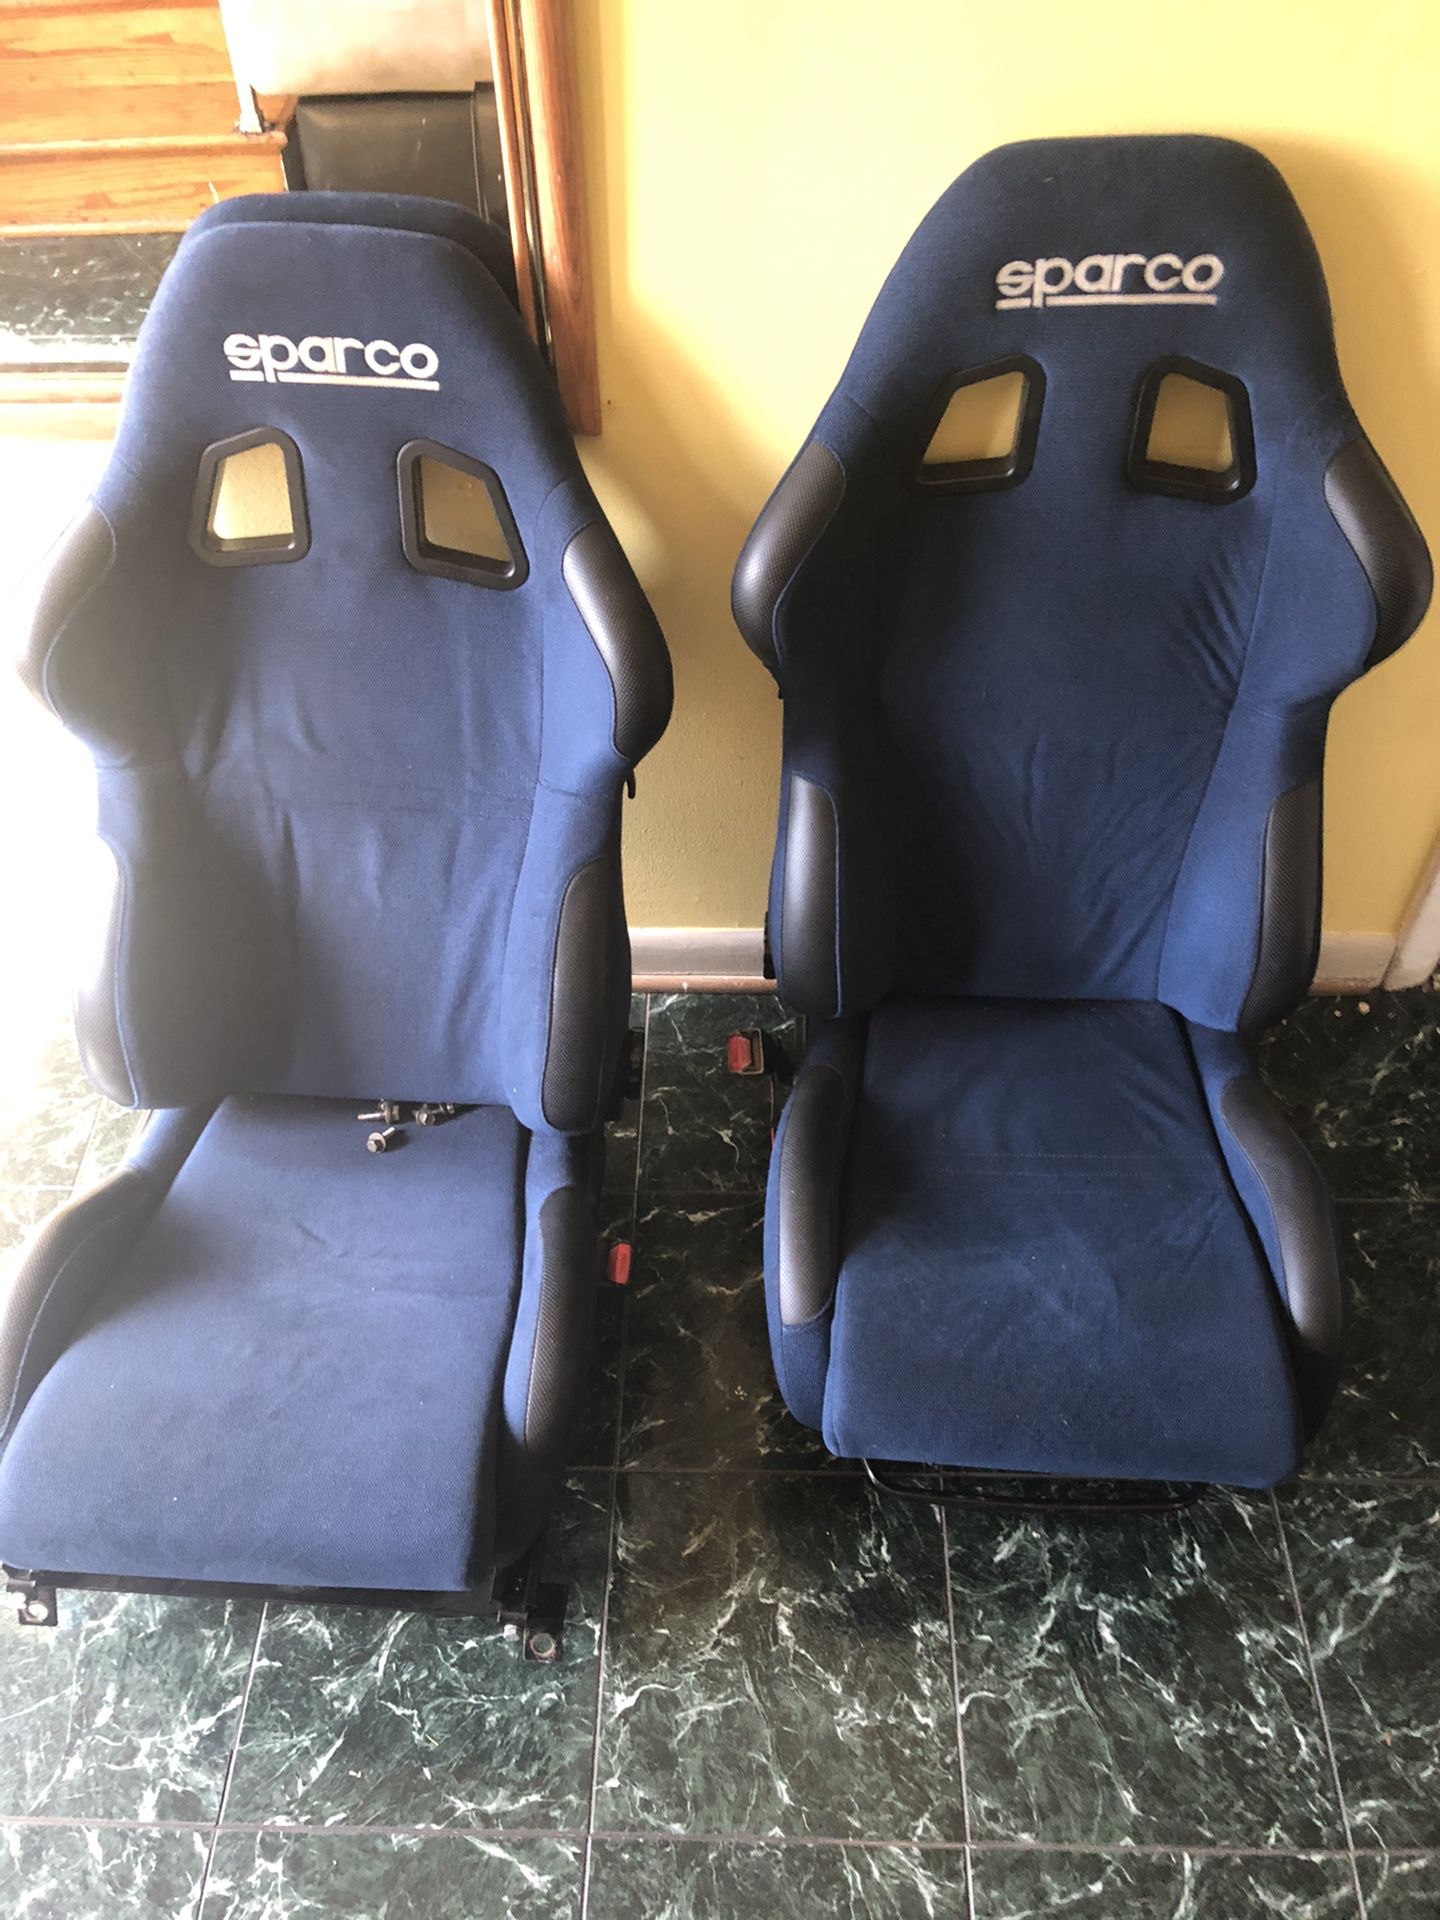 Sparco seat trade for other seat